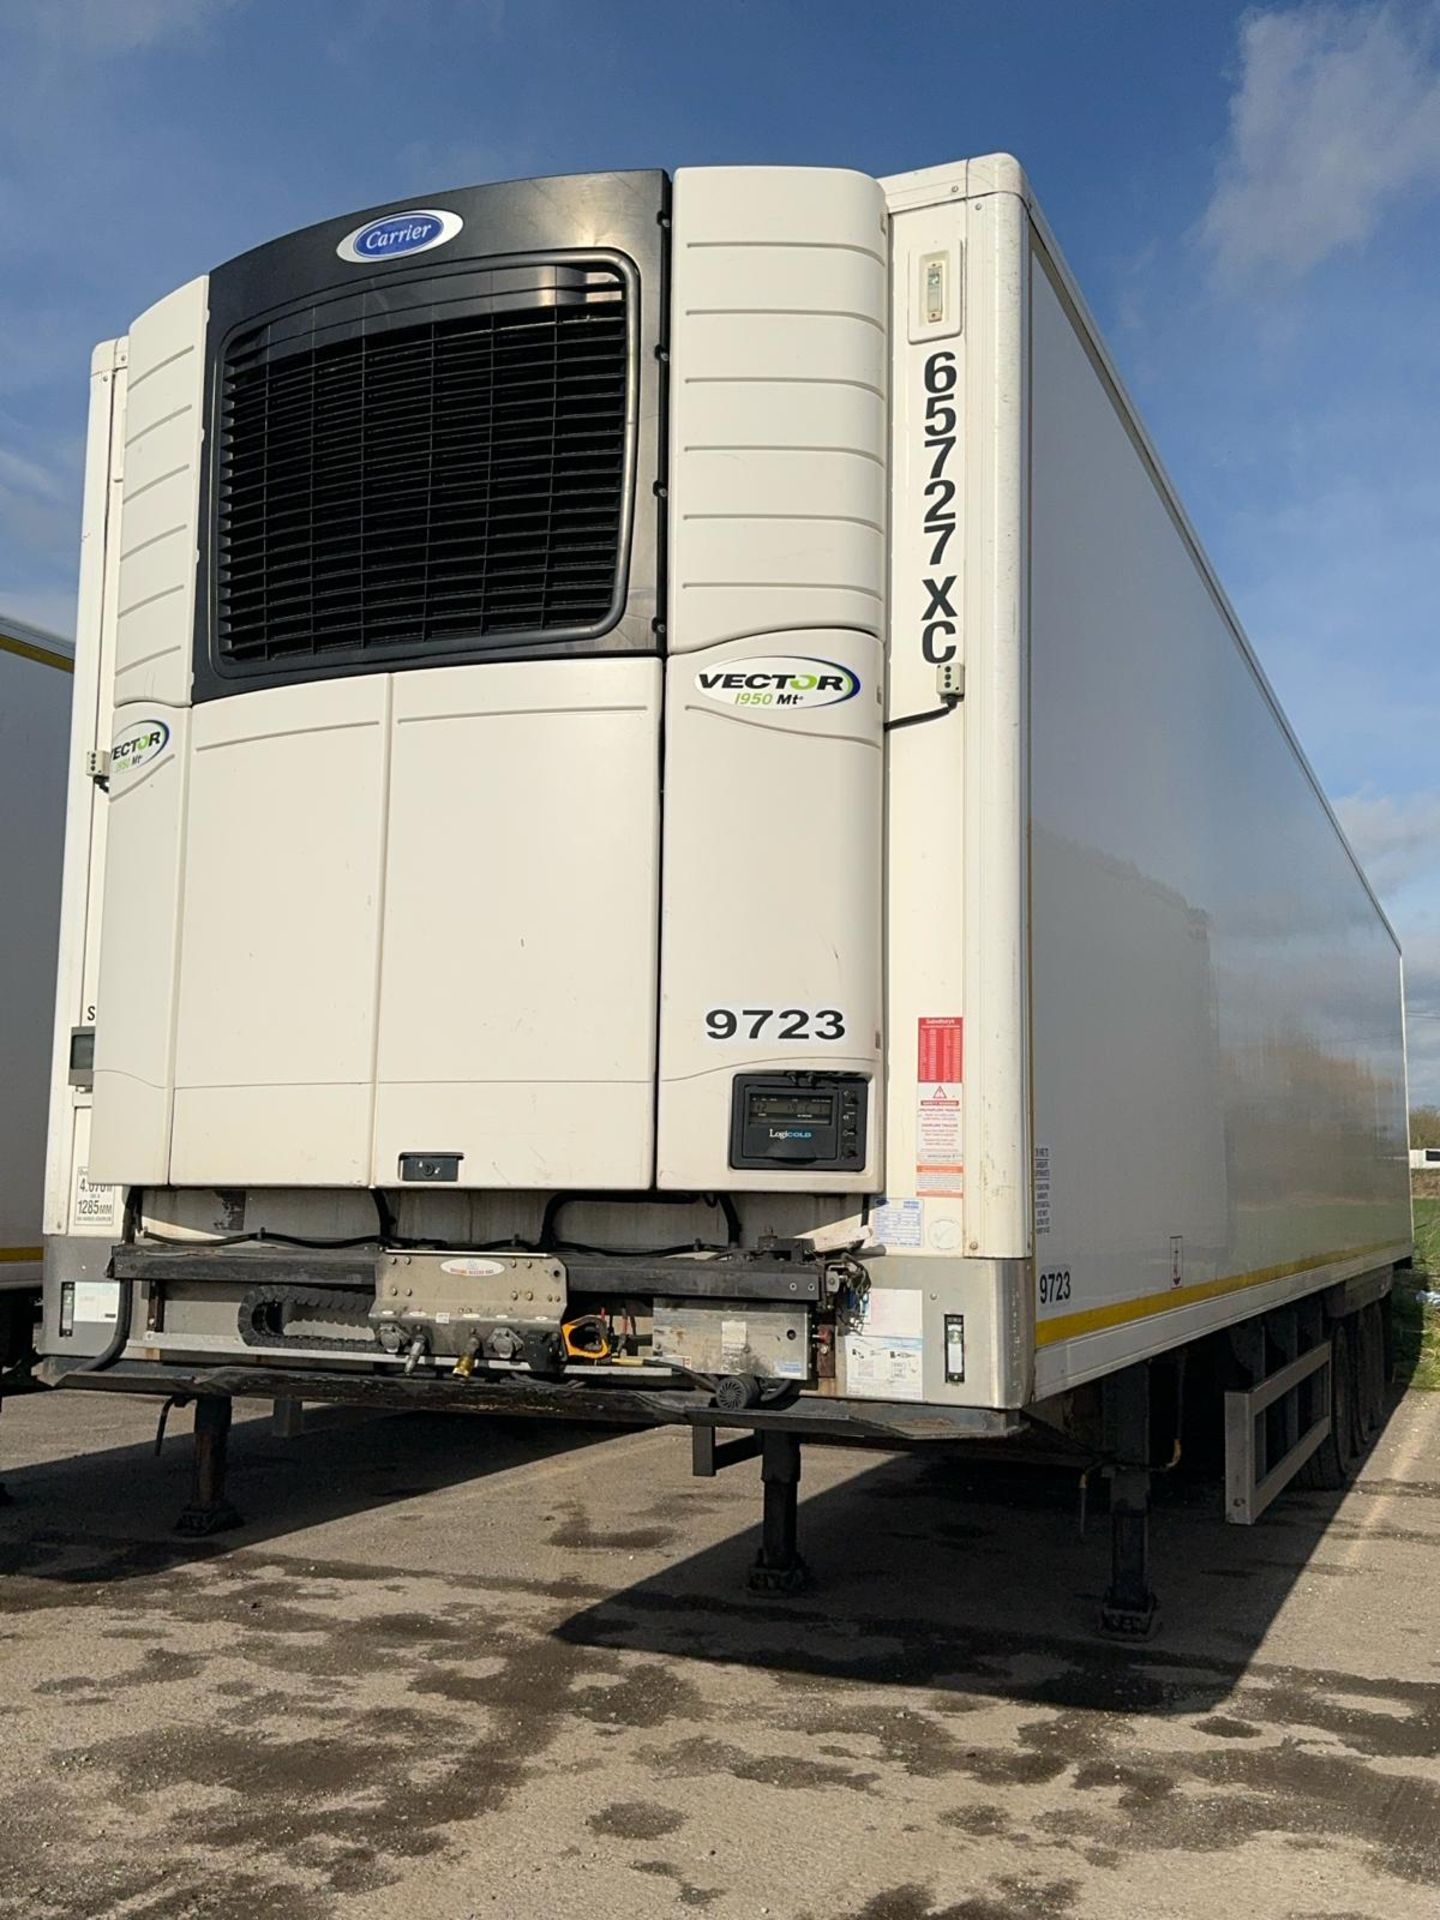 65727XC – 2015 Montracon 13.6m Refrigerated Trailer - Image 11 of 11